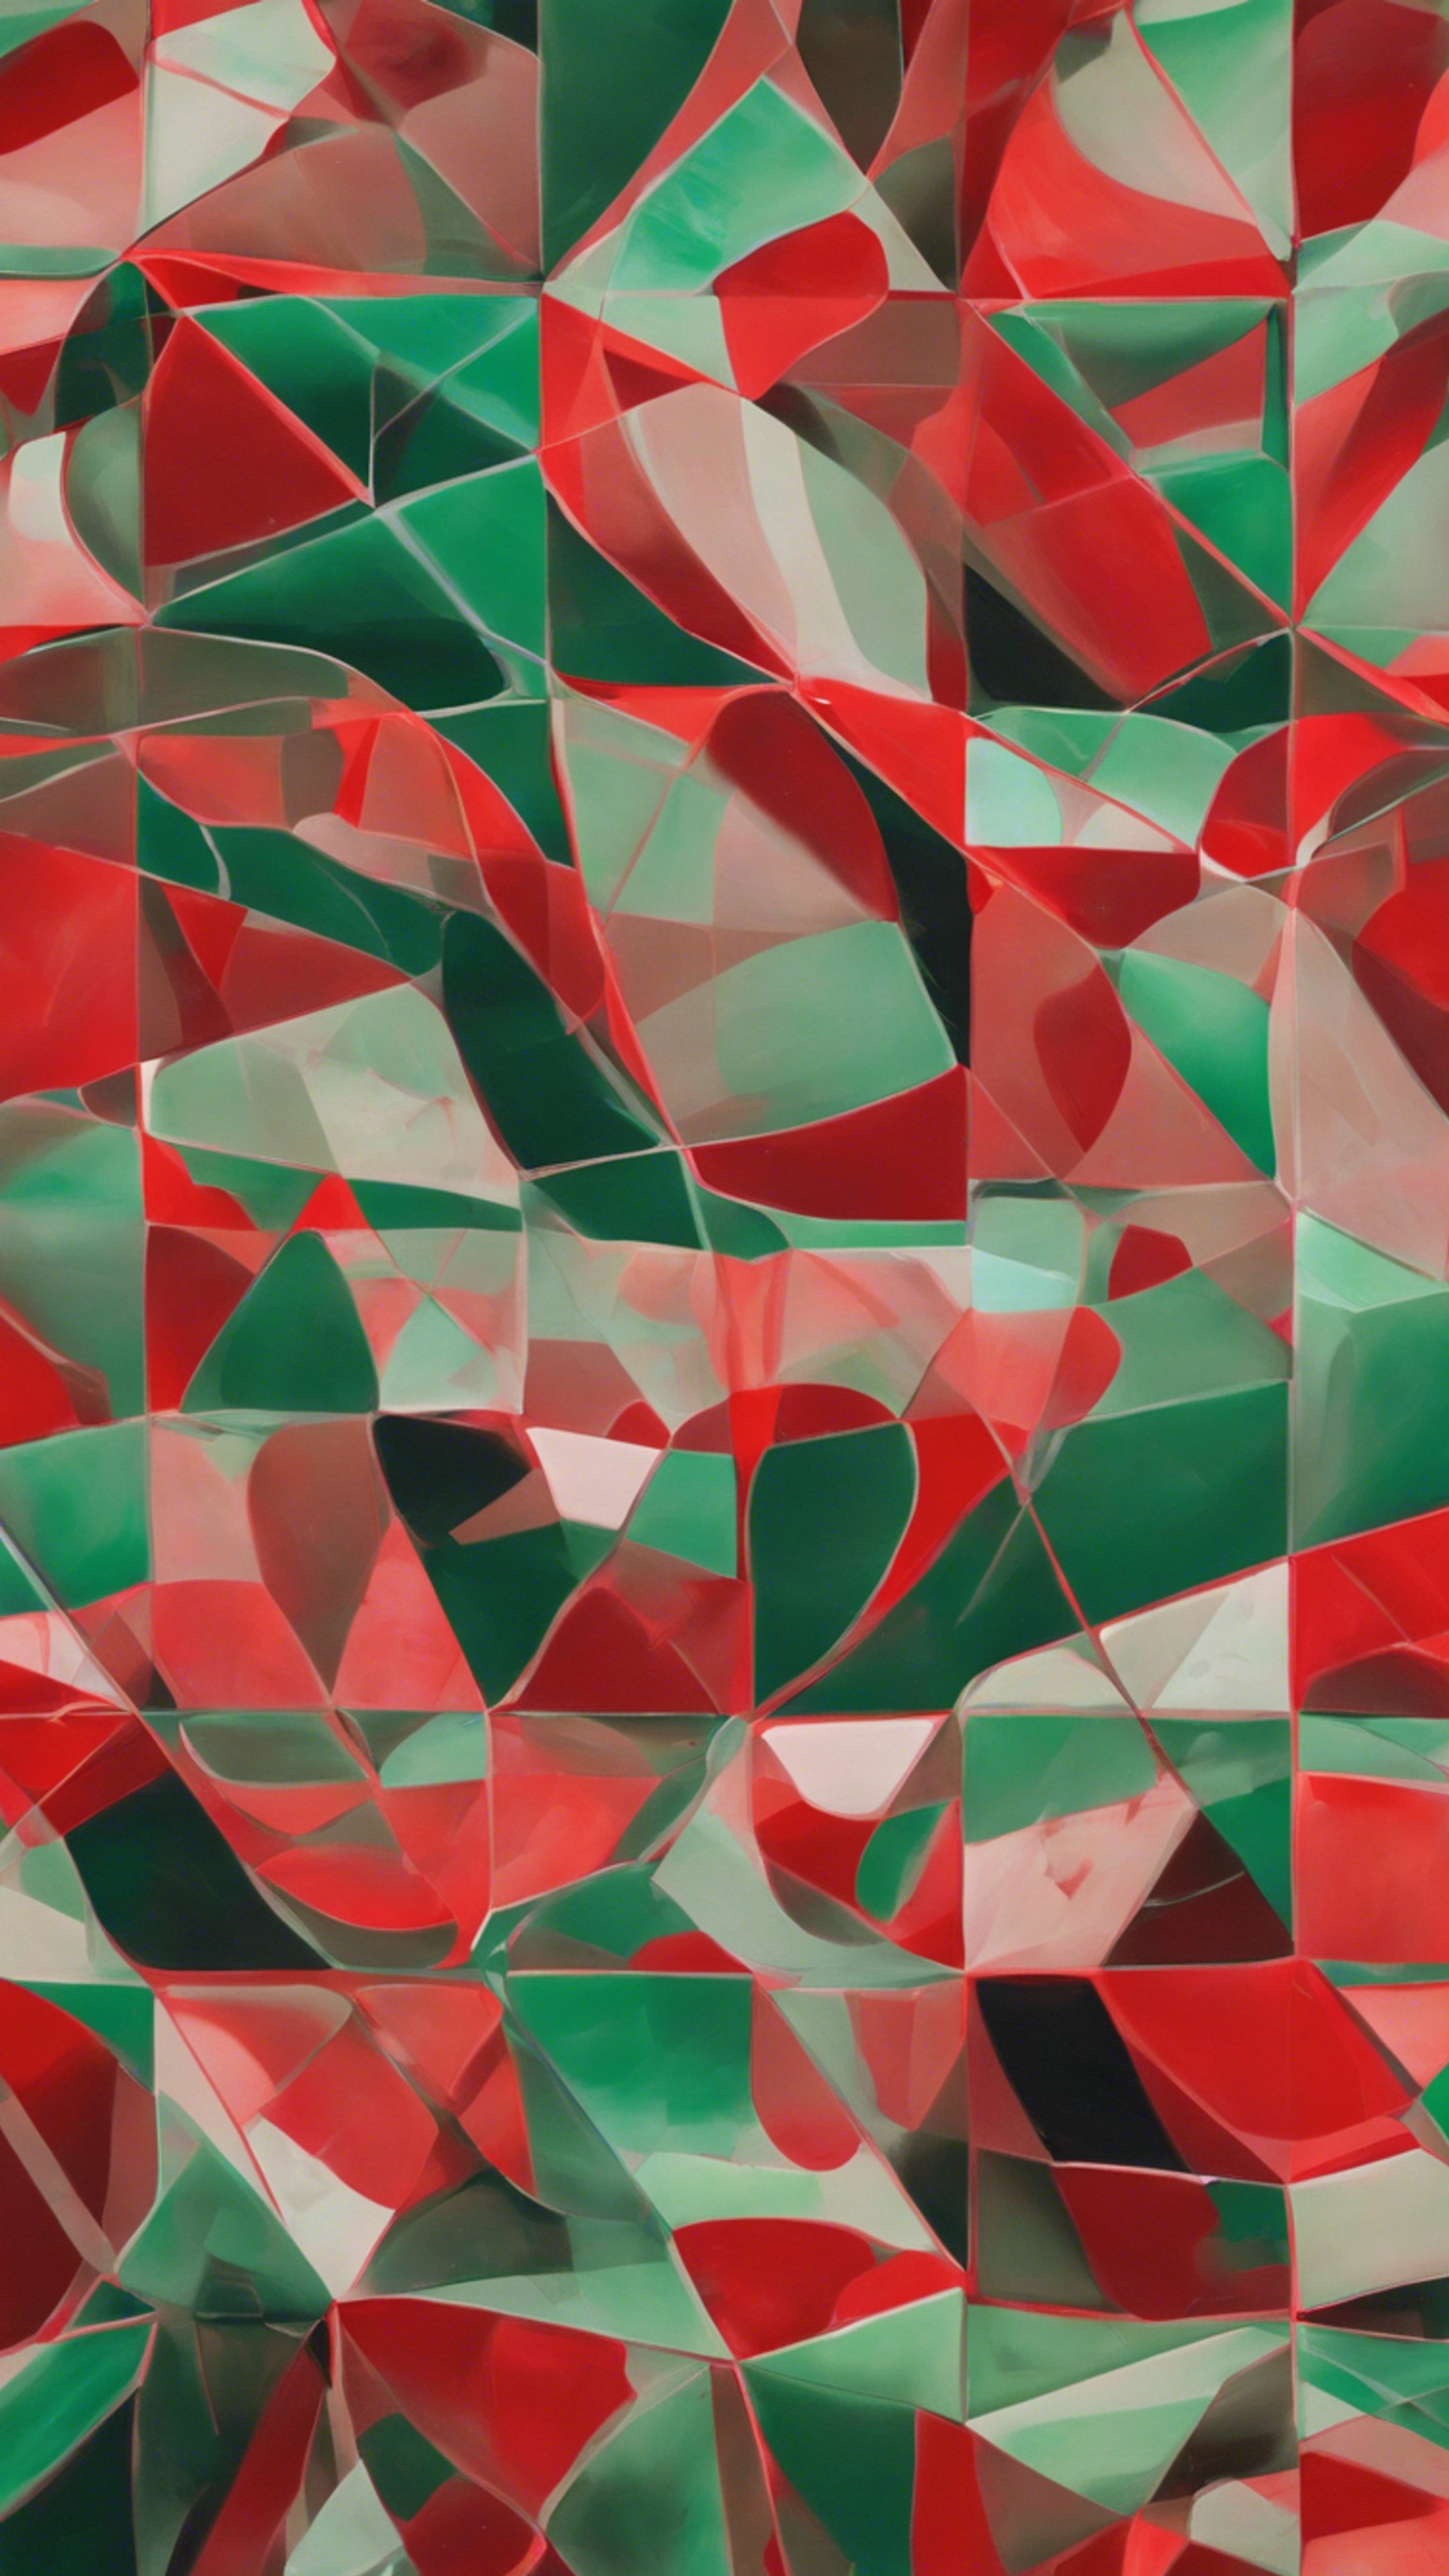 A modernist painting of red and green geometrical shapes, seamless in their connection کاغذ دیواری[cfa3acf637214e6a9239]